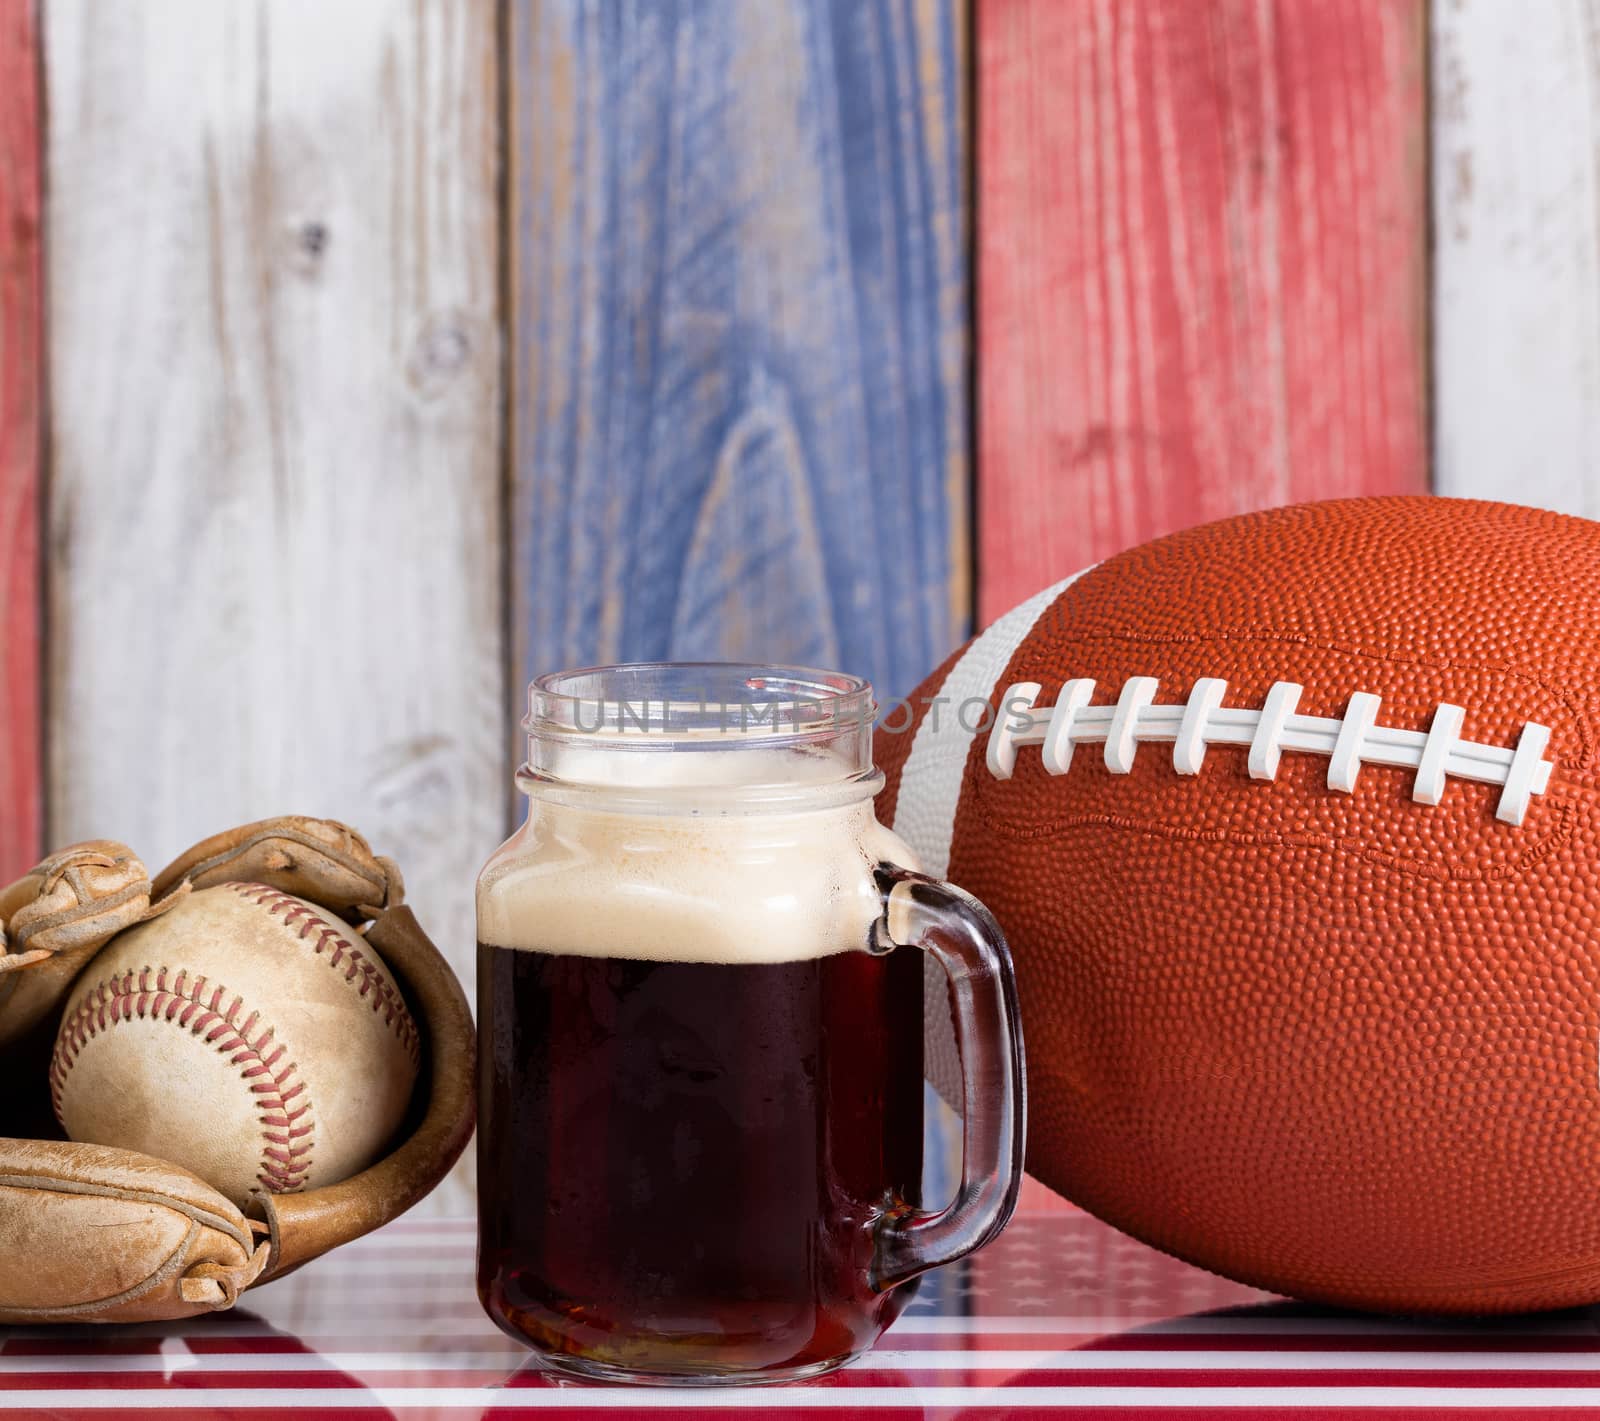 Close up front view of a glass of cold dark beer with a worn baseball mitt, ball and football.  Faded wooden boards painted red, white and blue in background with USA flag underneath.  